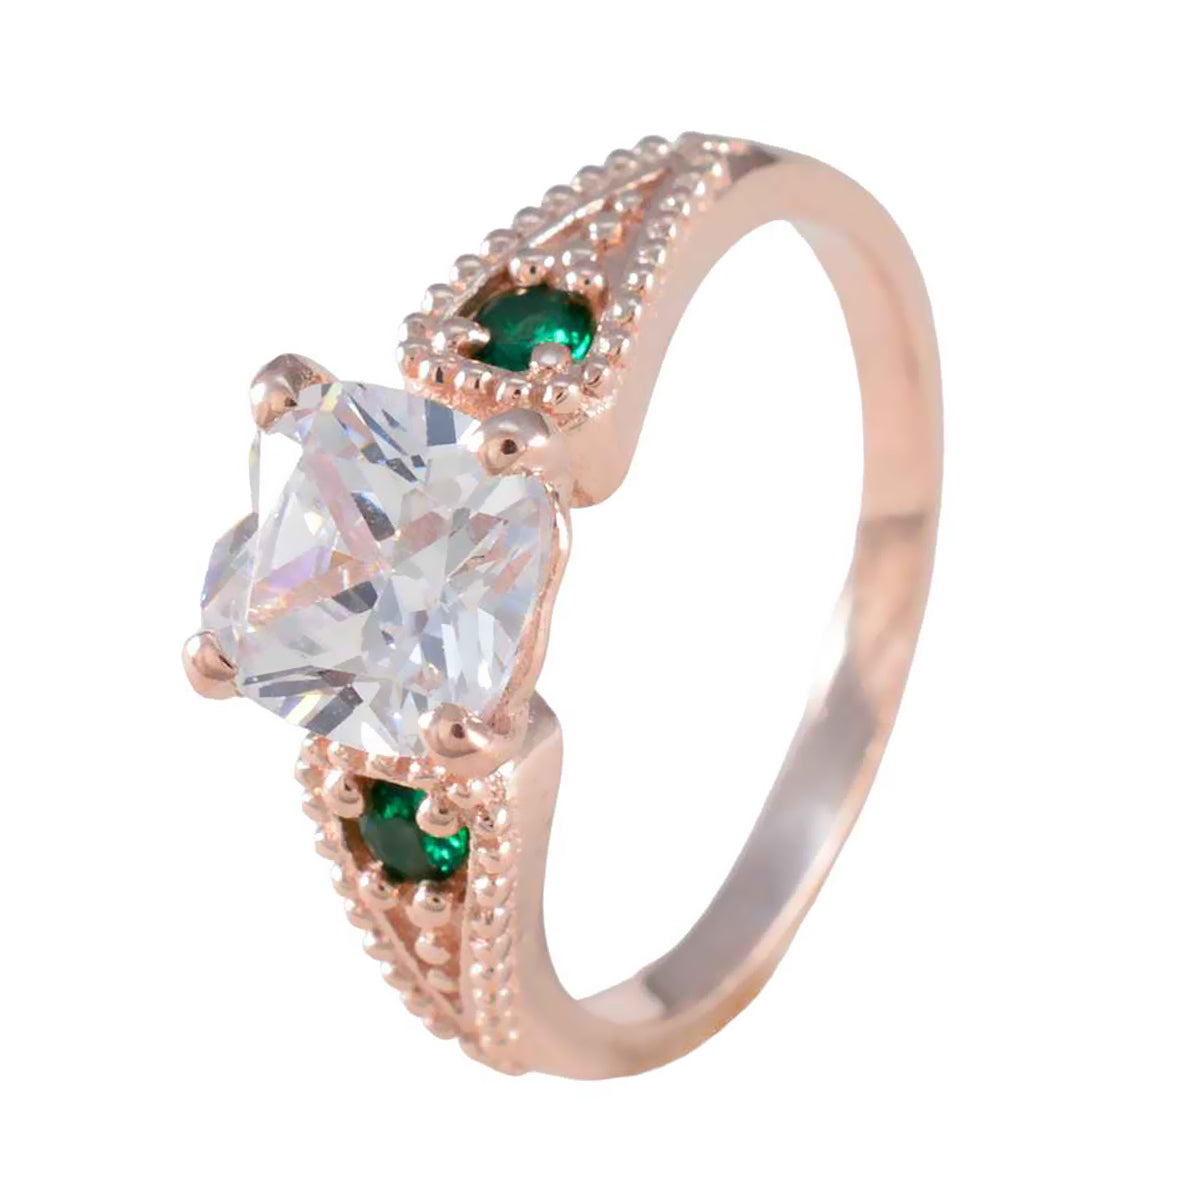 Riyo Desirable Silver Ring With Rose Gold Plating Emerald CZ Stone Cushion Shape Prong Setting Bridal Jewelry Valentines Day Ring